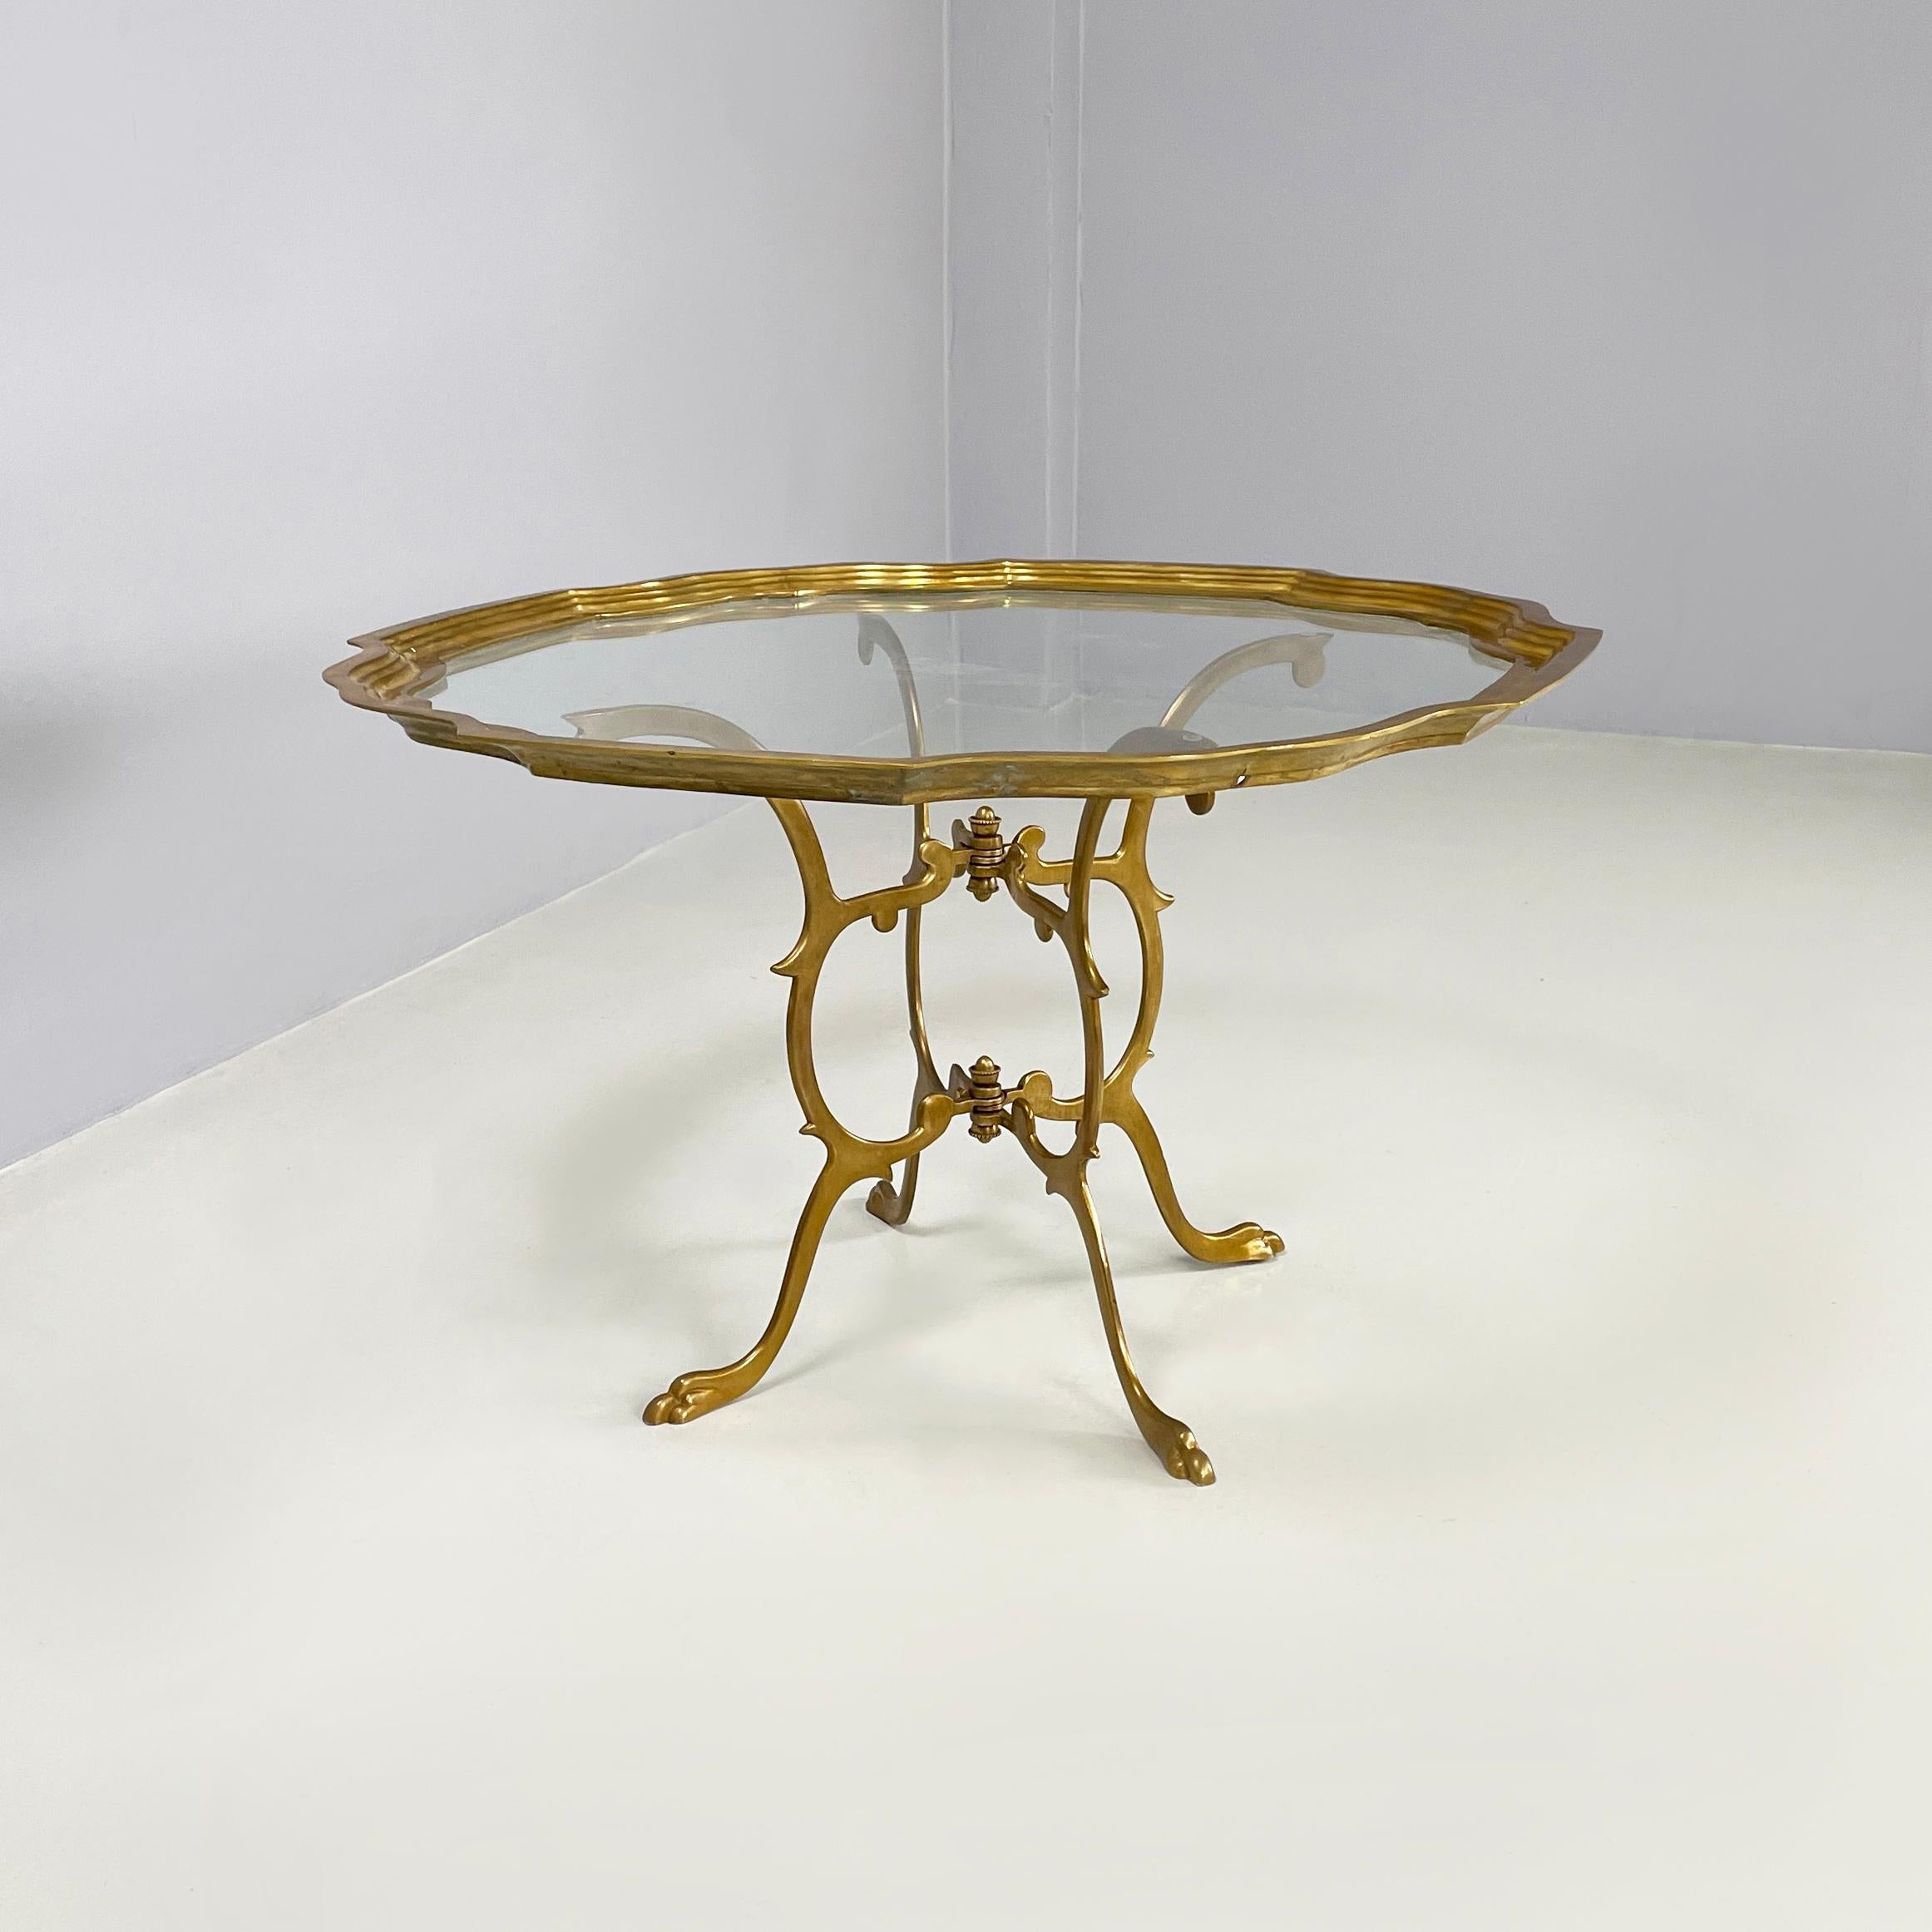 Italian mid-century modern Coffee table in glass and brass, 1960s
Coffee table with geometric shaped glass top with cantilevered brass profile. The base on which the top rests is made up of 4 shaped brass legs. Worked feet.
1960 approx.
Good